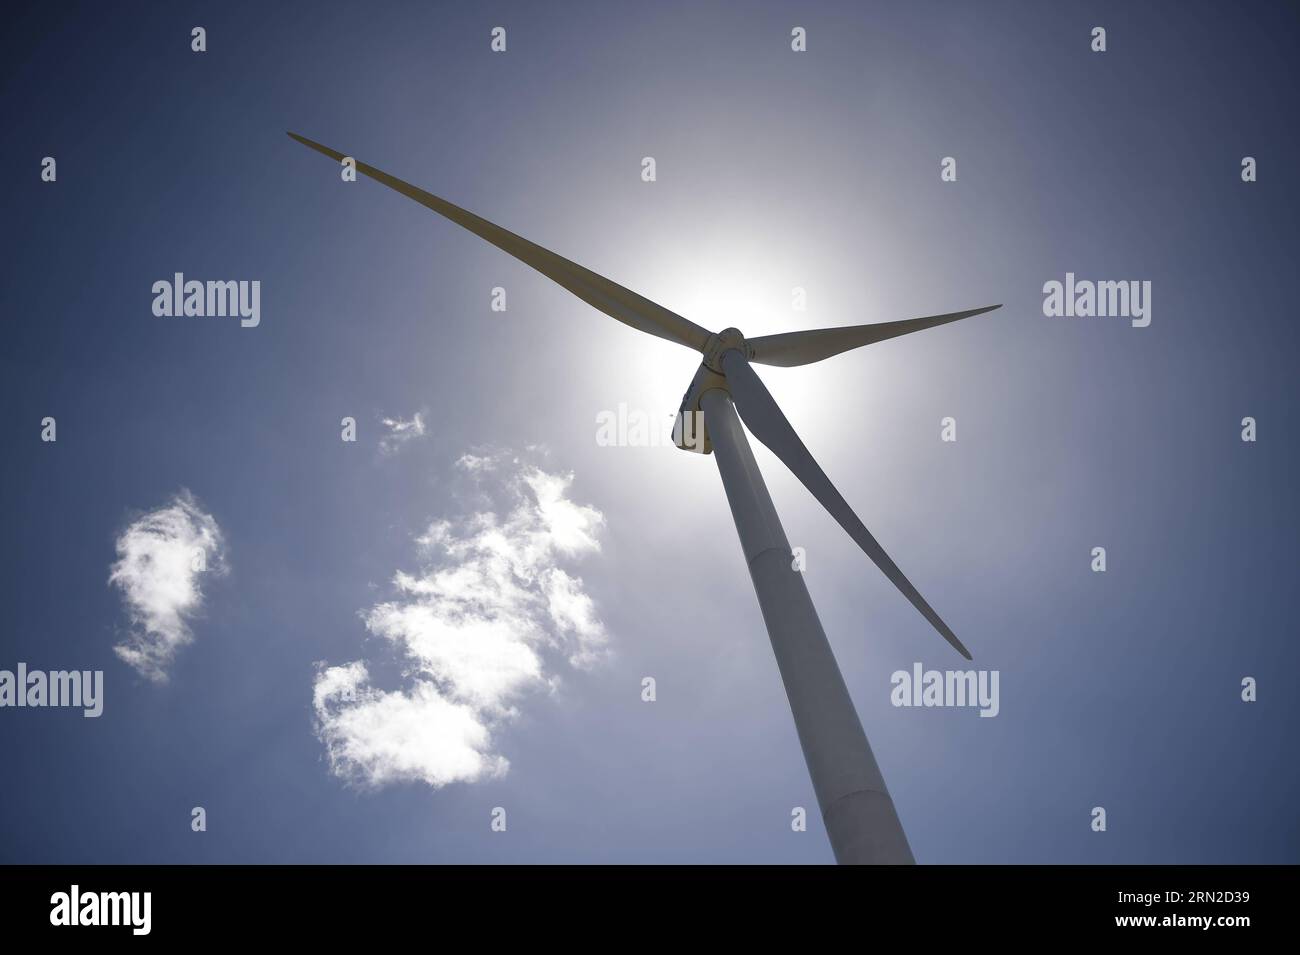 A wind turbine is seen at the Wind Park, in Colonia department, 165 km from Montevideo, capital of Uruguay, on Feb. 28, 2015. The Wind Park is a joint venture between the National Administrations of Power Plants and Electrical Transmissions of Uruguay and the Brazilian Electrobras, with an investment of 100 million U.S. dollars to supply the electrical grids of both countries. Nicolas Celaya) URUGUAY-COLONIA-BRAZIL-POLITICS-WIND PARK e NICOLASxCELAYA PUBLICATIONxNOTxINxCHN   a Wind Turbine IS Lakes AT The Wind Park in Colonia Department 165 km from Montevideo Capital of Uruguay ON Feb 28 2015 Stock Photo